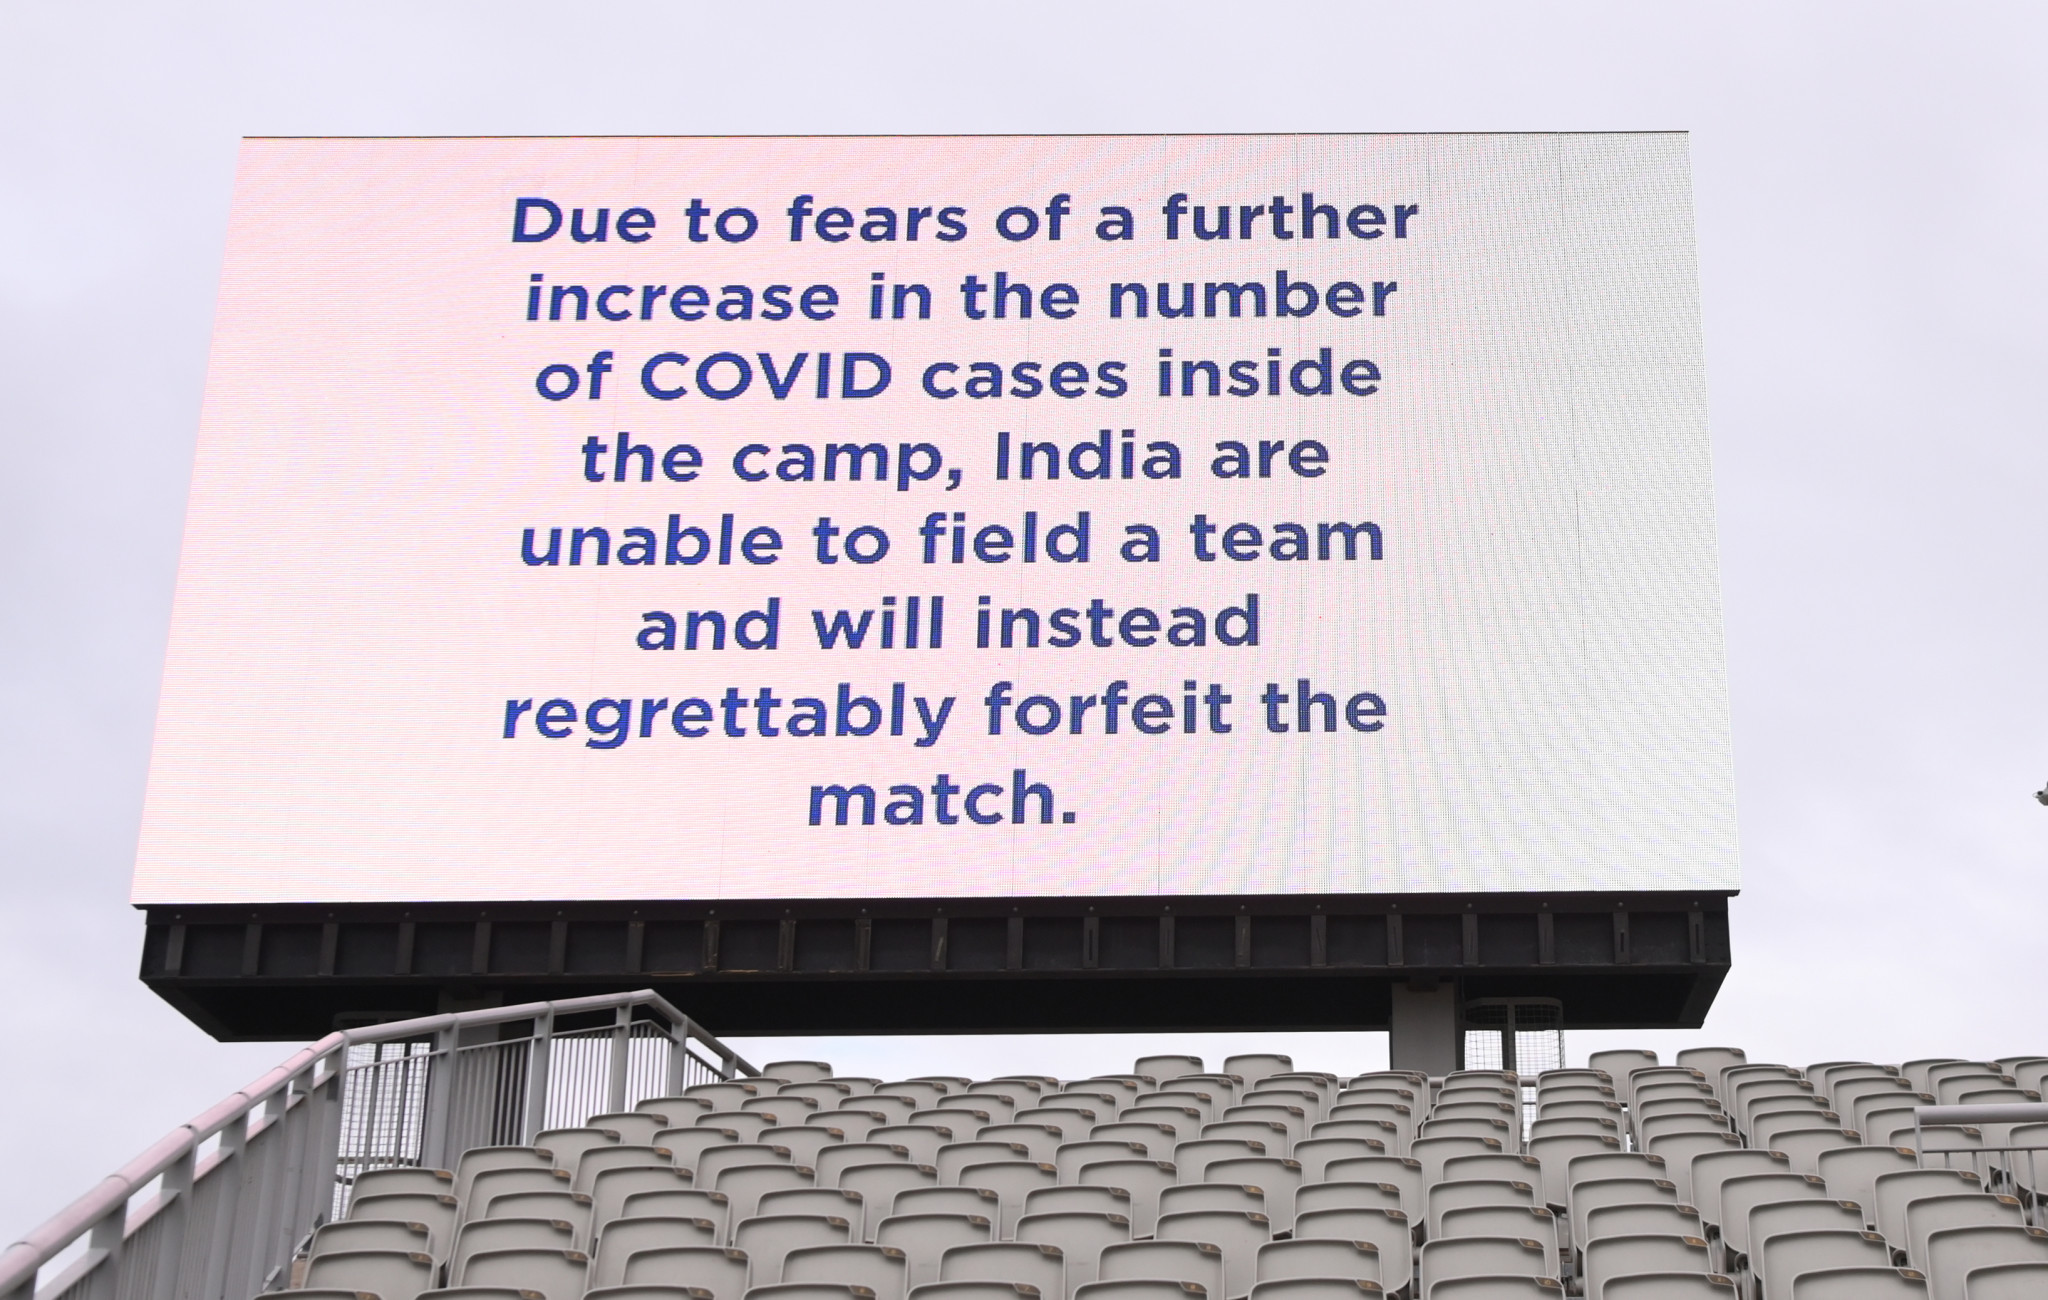 The ECB originally suggested that India would forfeit the match, but this has since been removed from the statement ©Getty Images